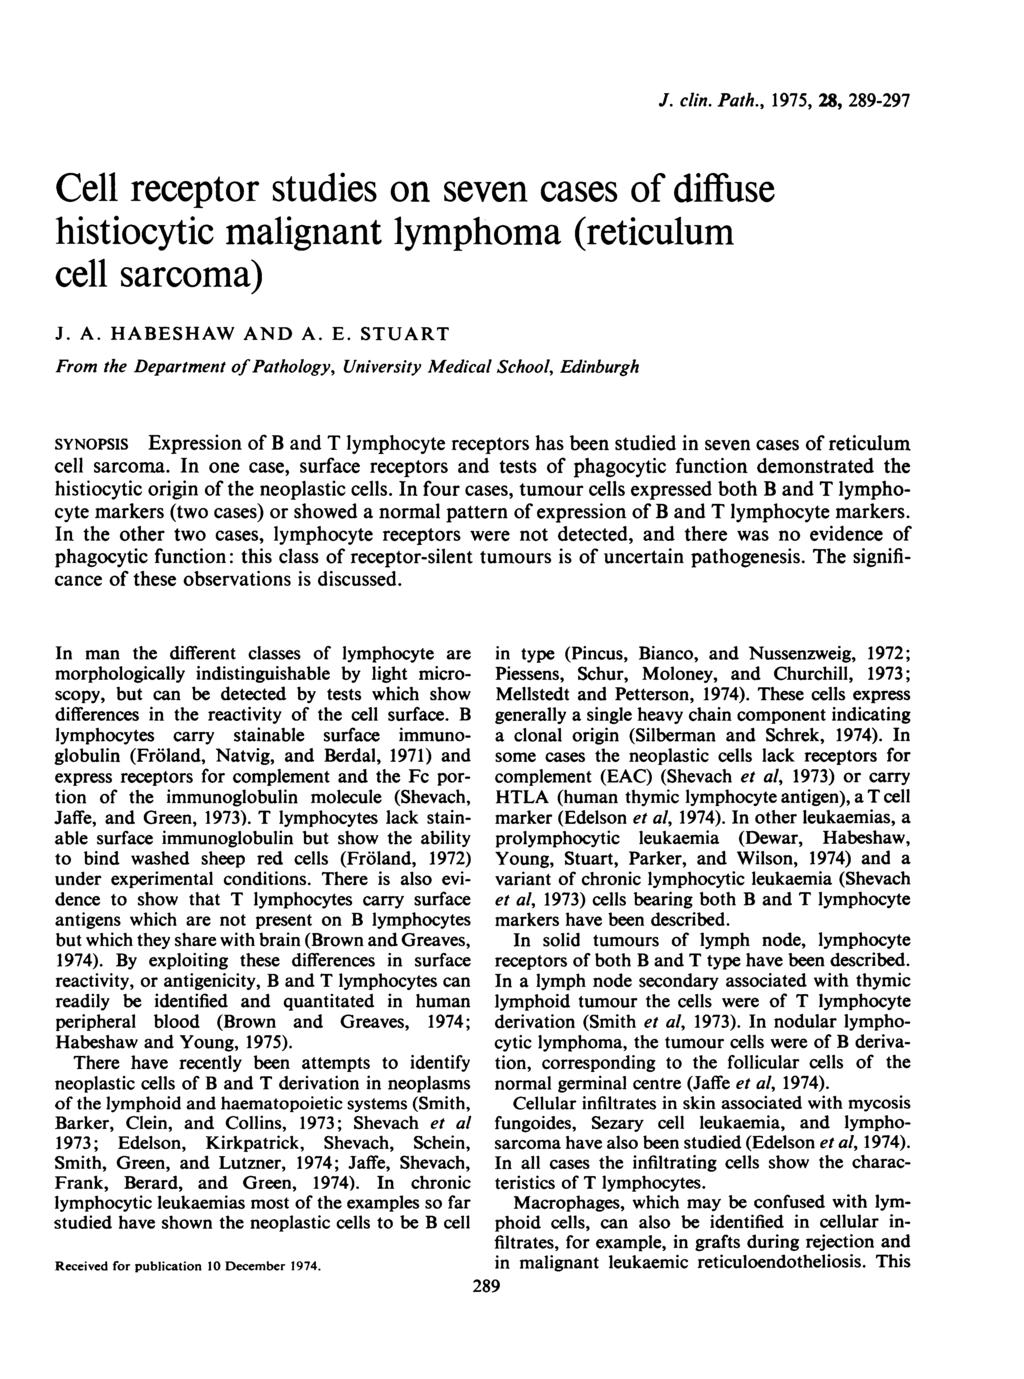 Cell receptor studies on seven cases of diffuse histiocytic malignant lymphoma (reticulum cell sarcoma) J. A. HABESHAW AND A. E.